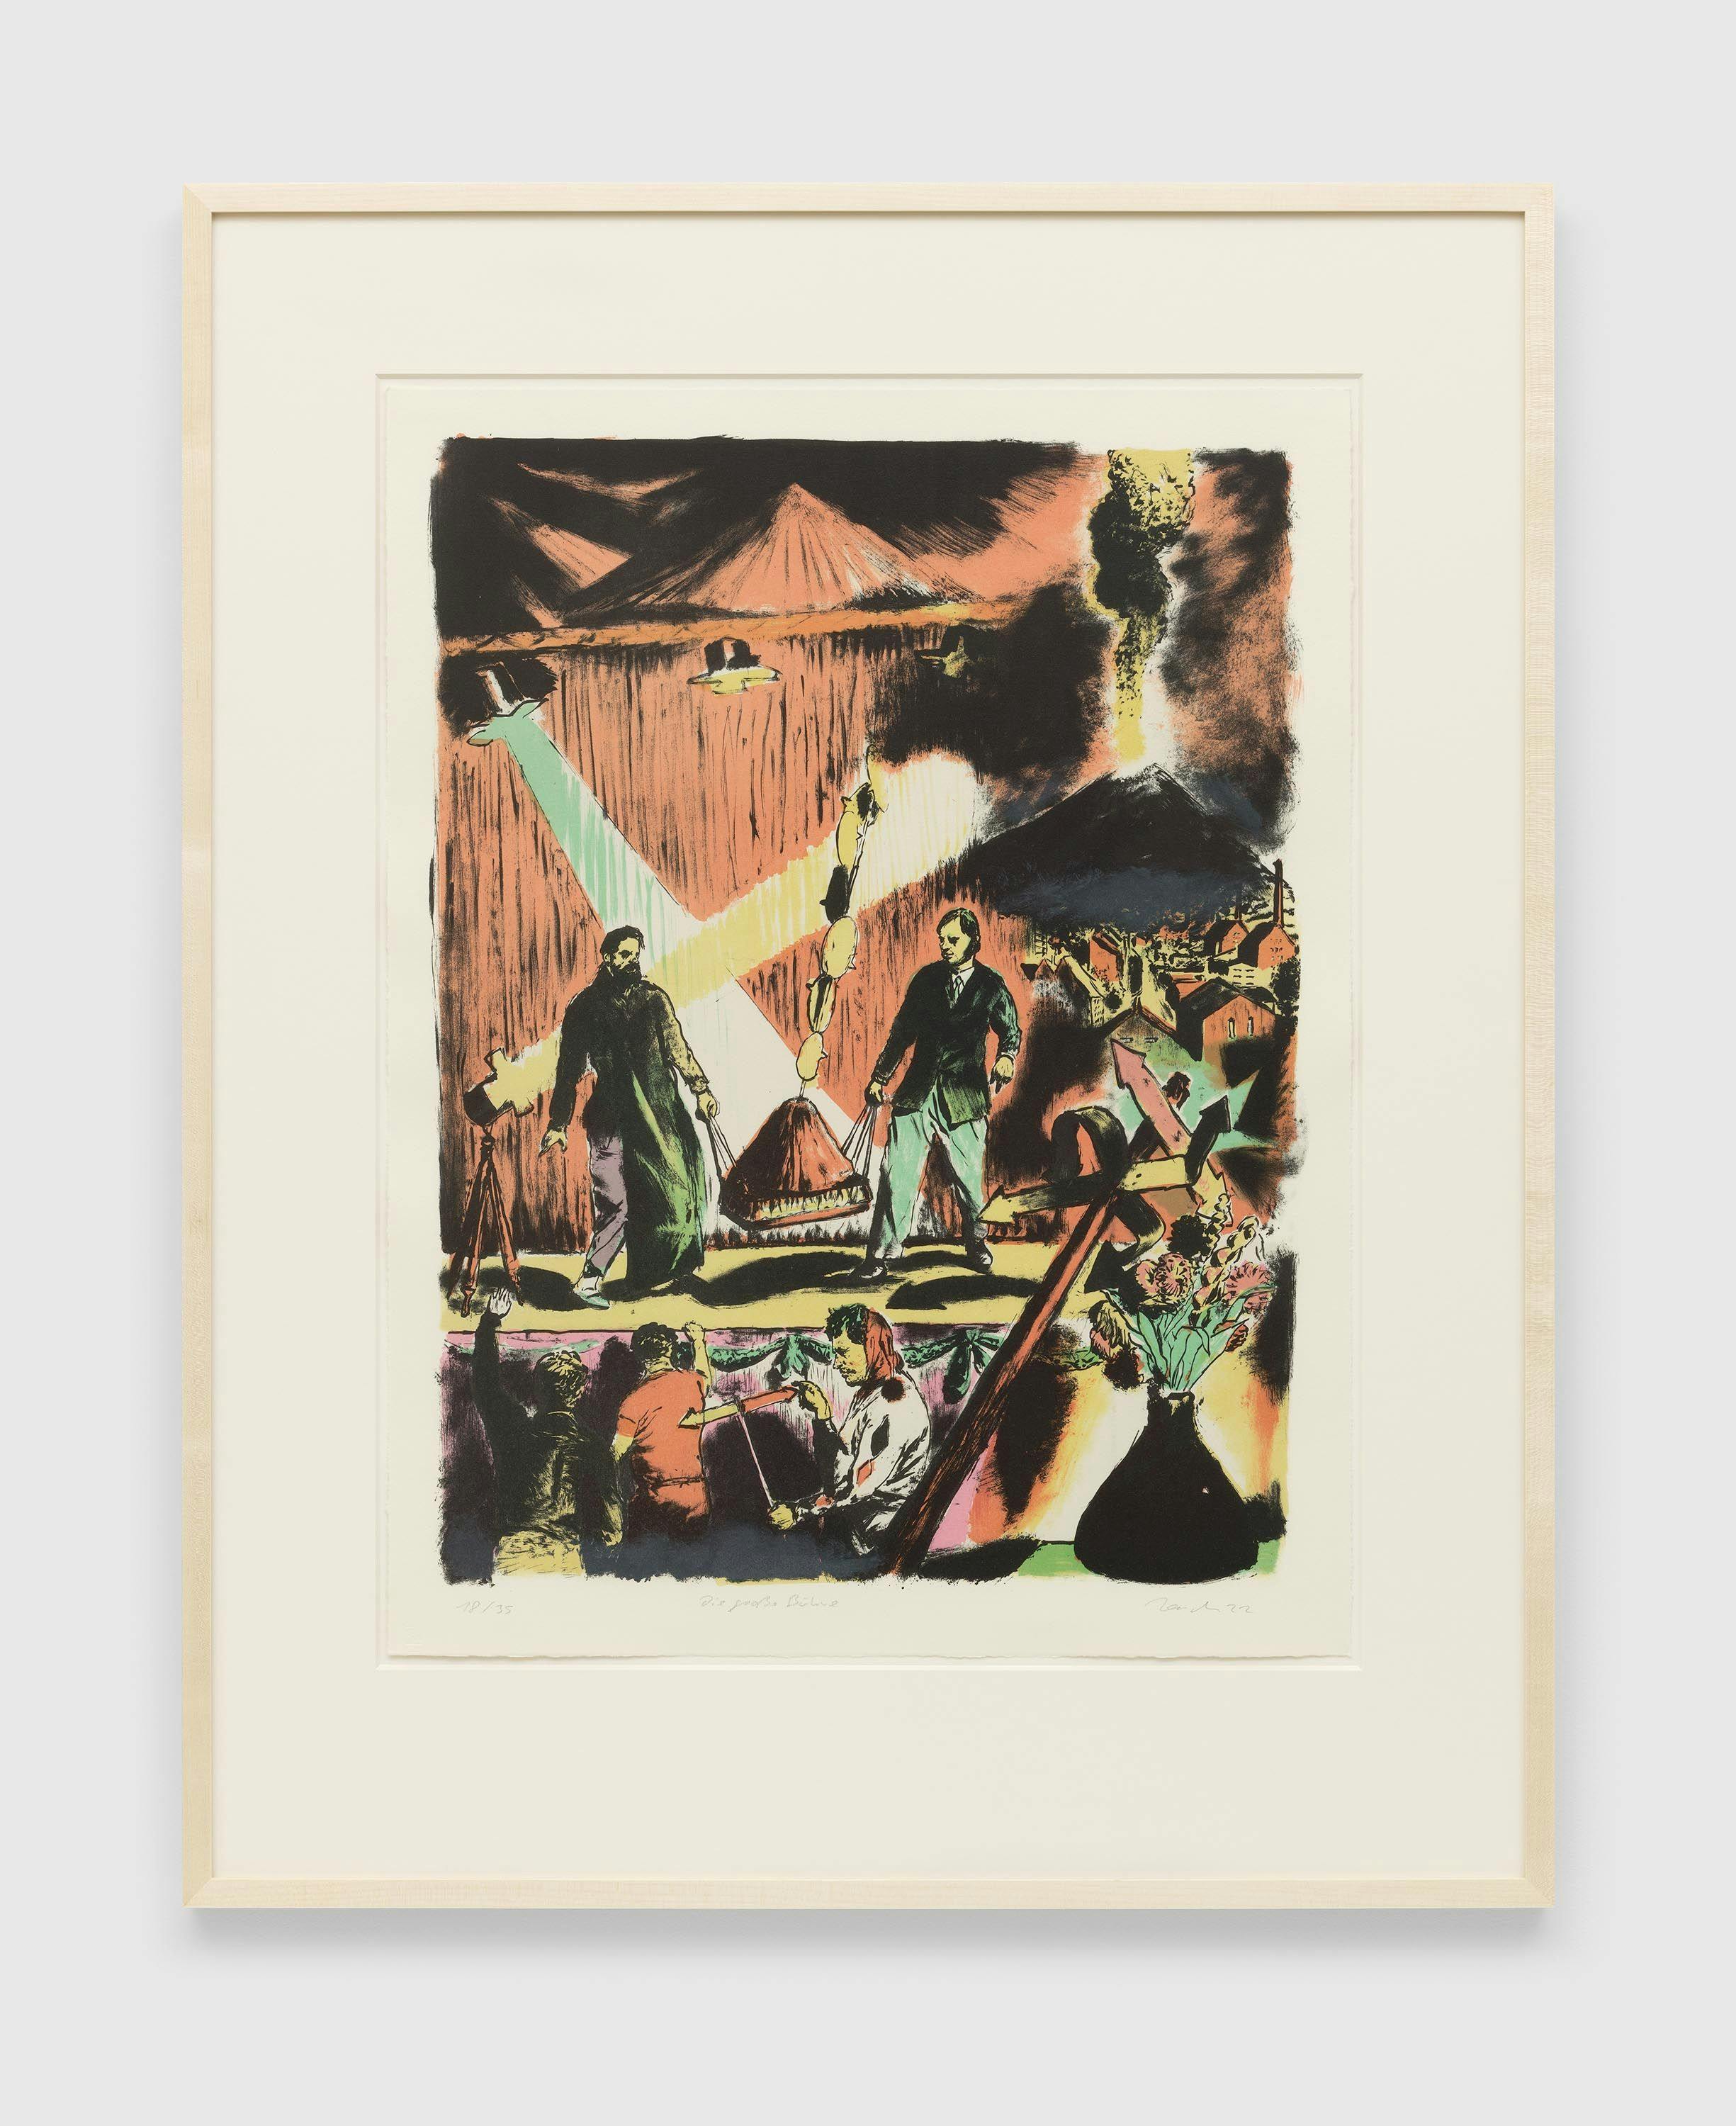 A print by Neo Rauch, titled Die große Bühne, dated 2022.